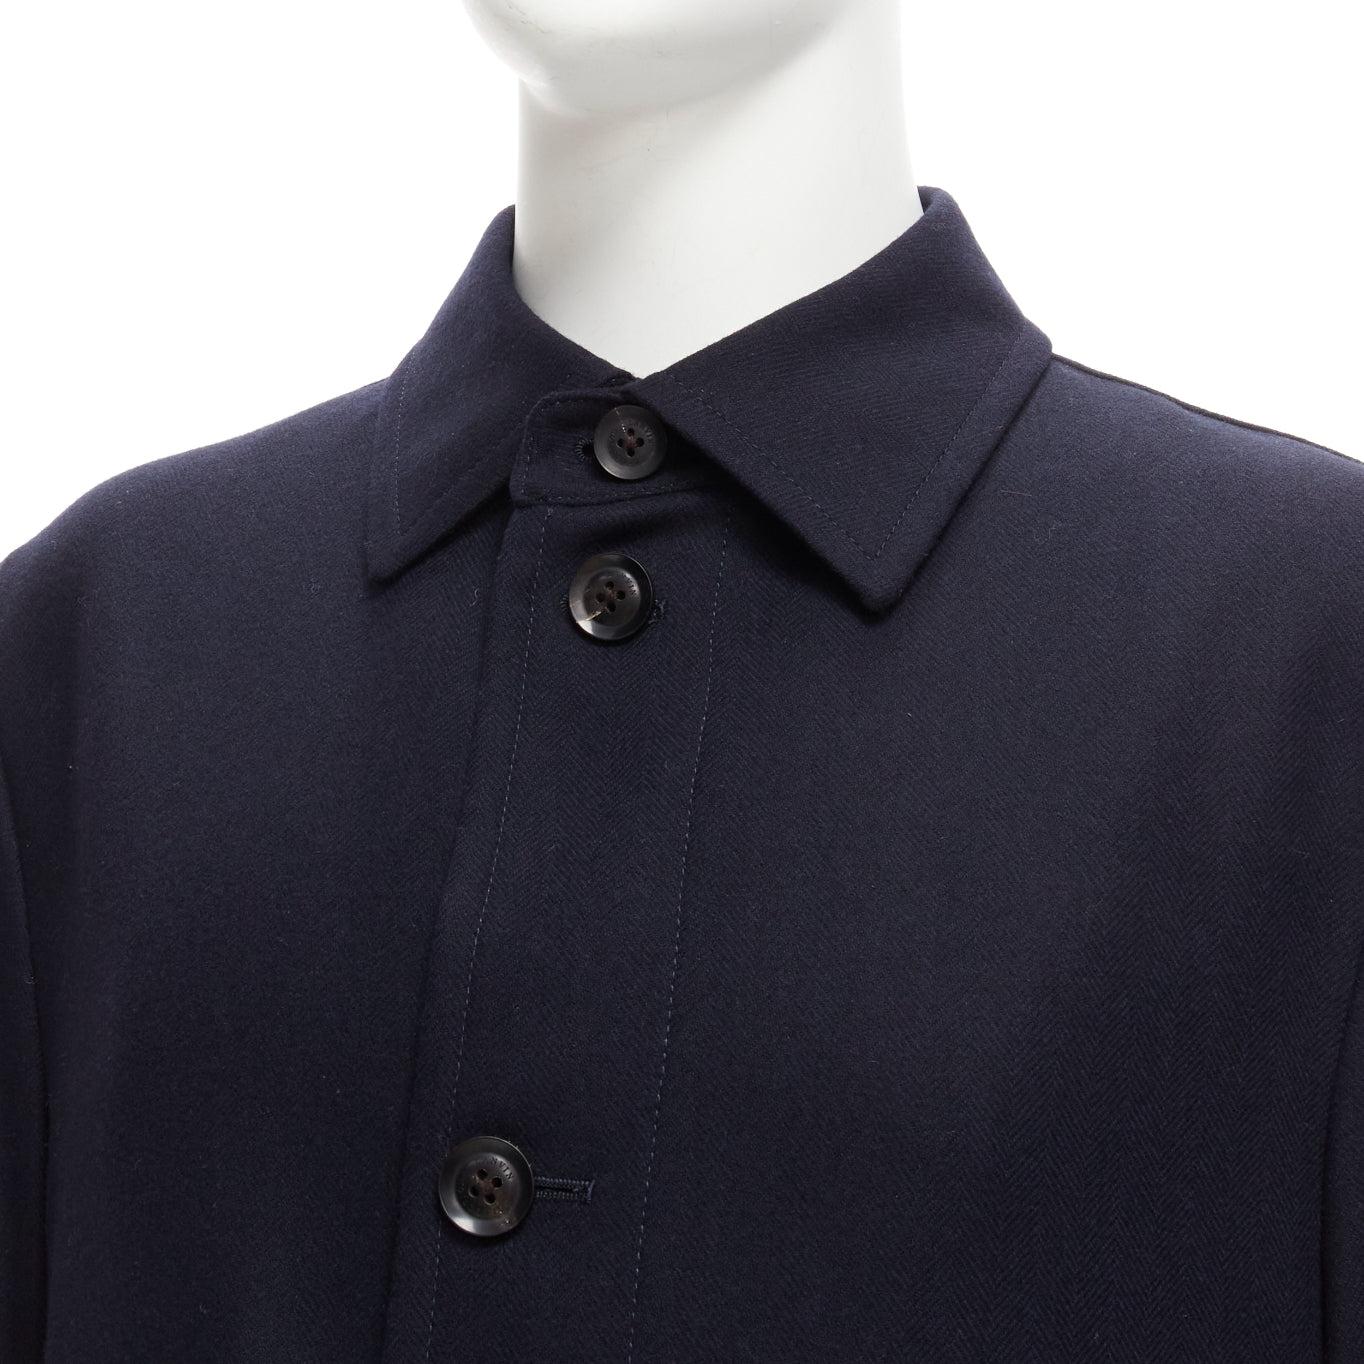 LANVIN Collection navy wool blend classic shell button longline coat IT48 M
Reference: JSLE/A00021
Brand: Lanvin
Collection: Collection
Material: Wool, Blend
Color: Navy
Pattern: Herringbone
Closure: Button
Lining: Green Fabric
Extra Details: Single